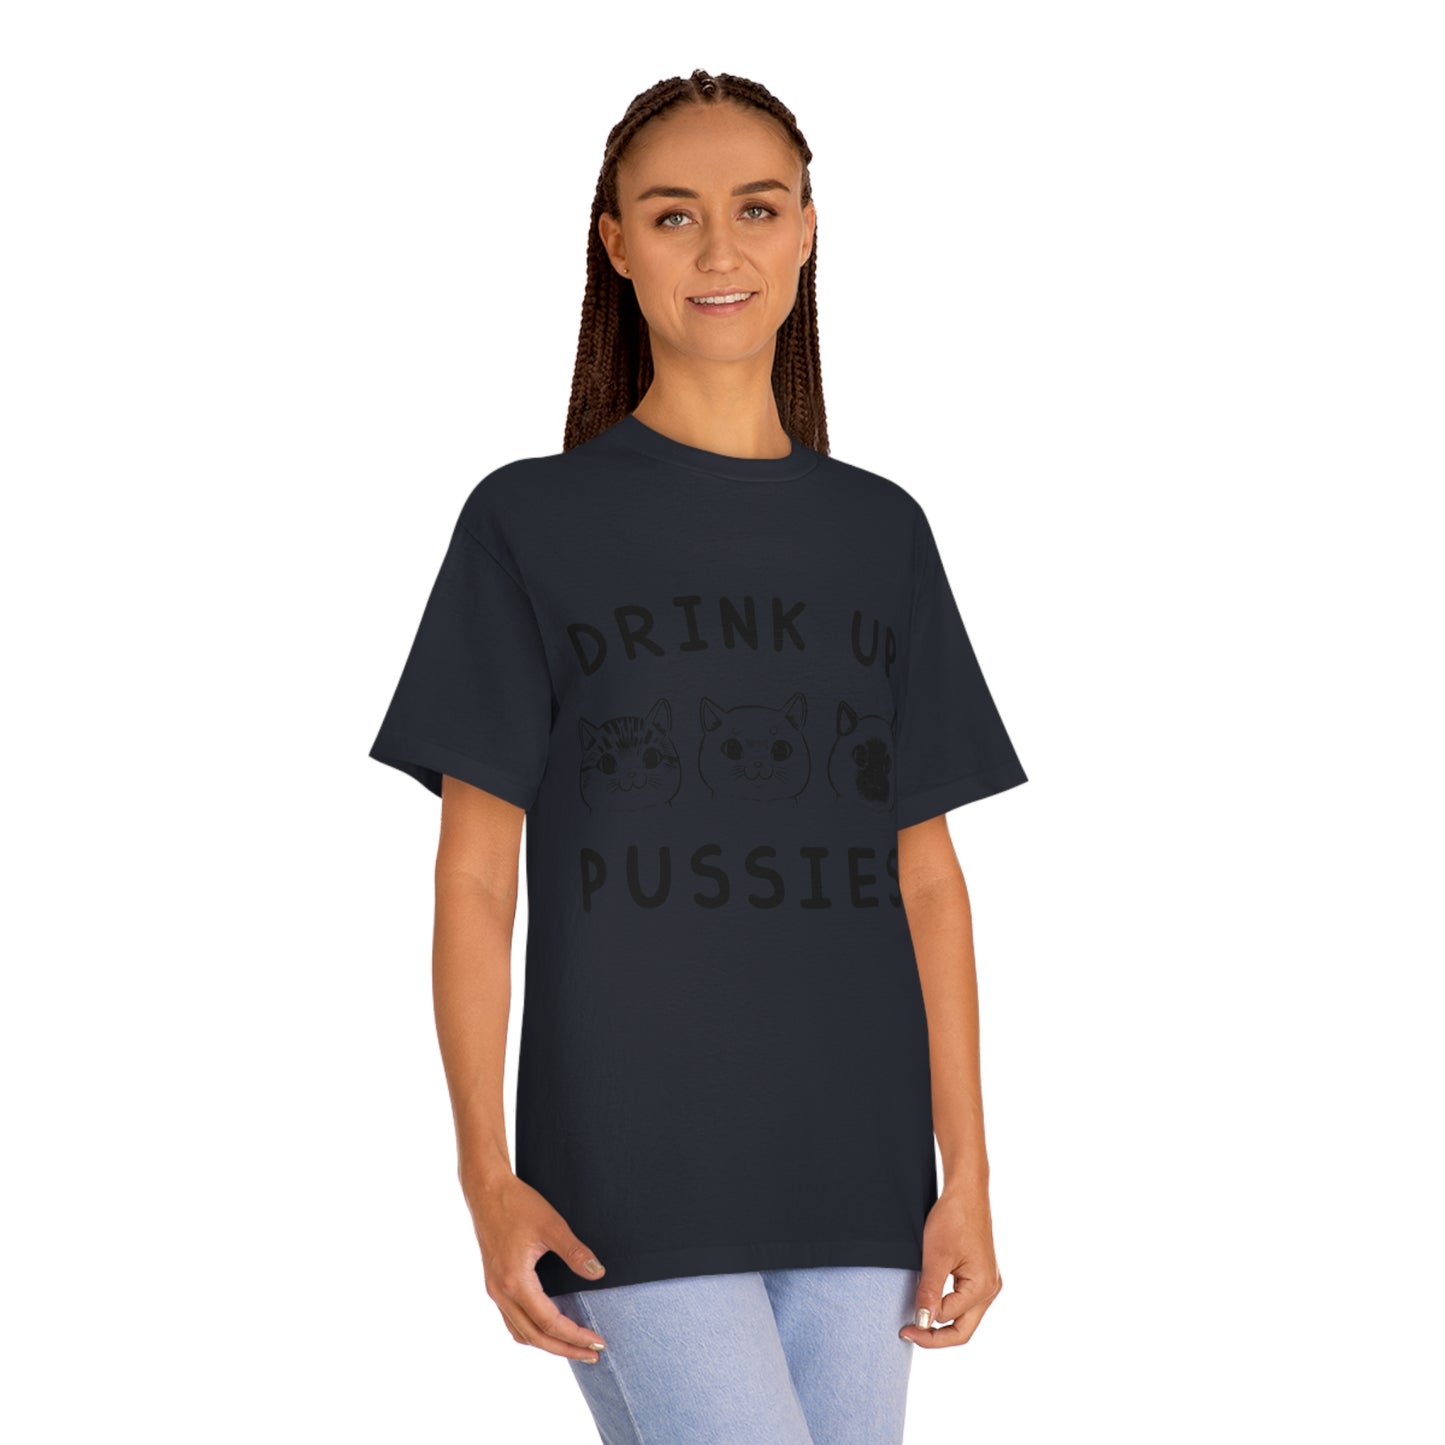 Drink up pussies Unisex Classic Tee